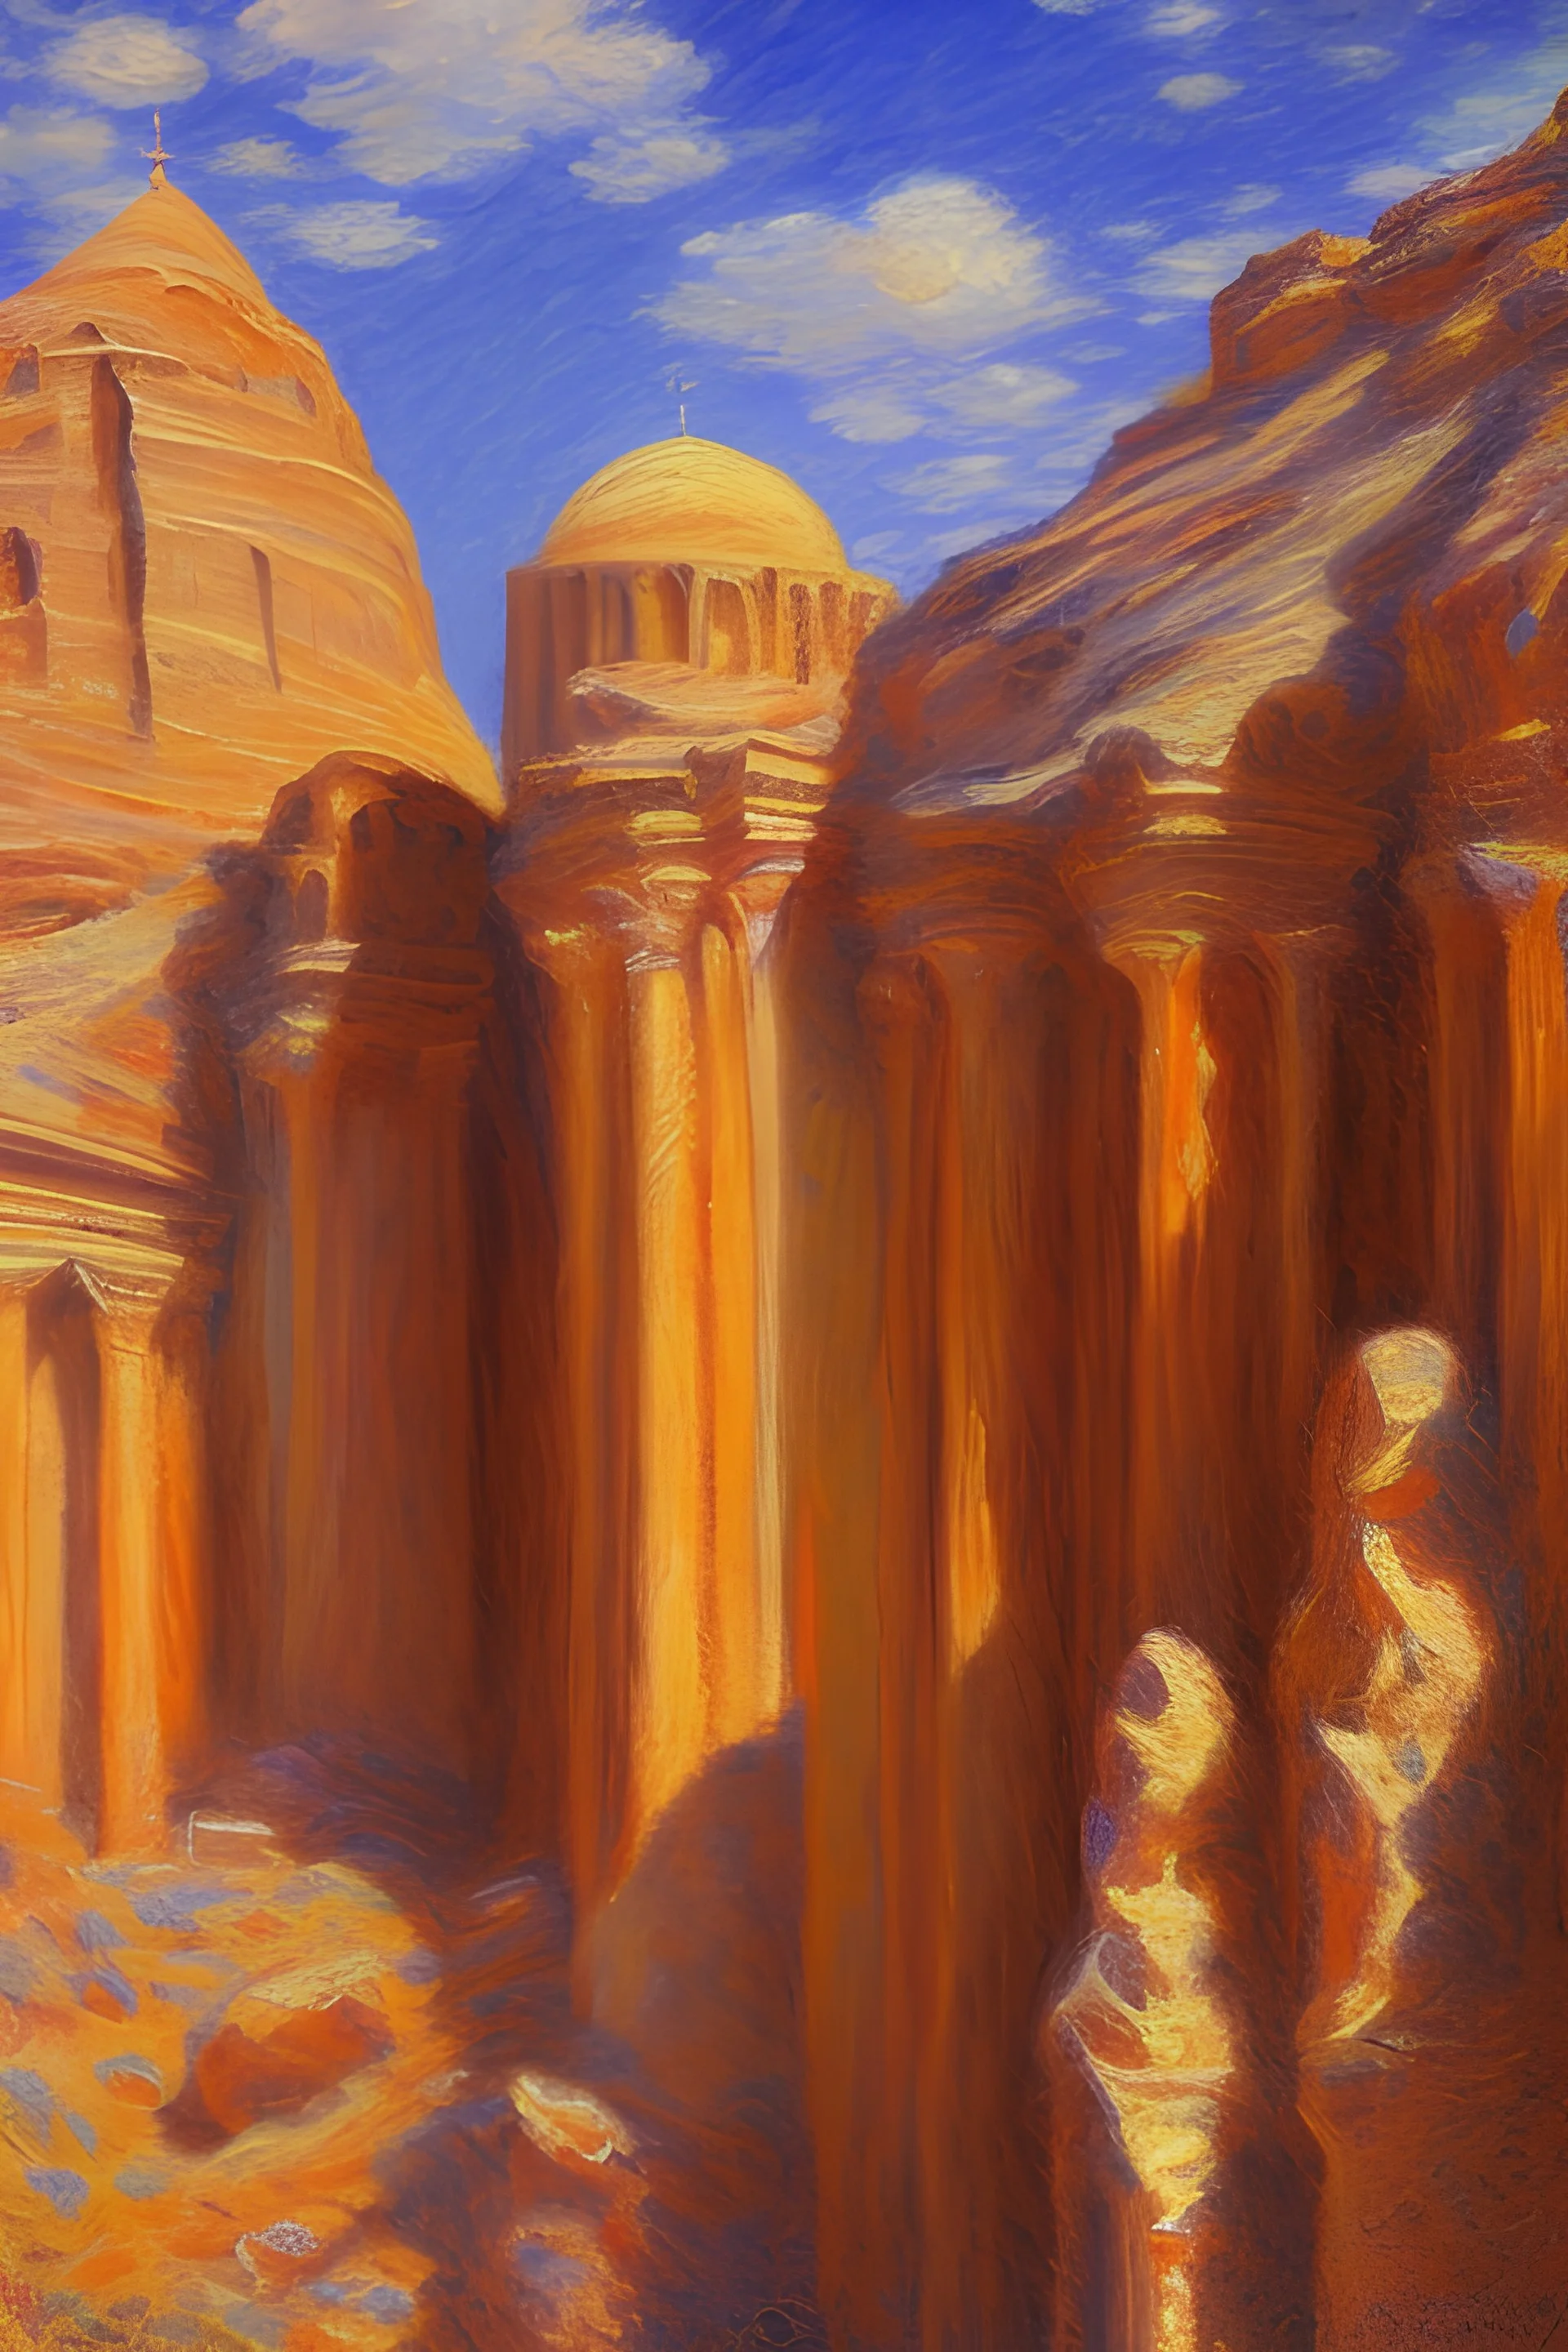 A beautiful impressionist painting by Monet. Impressionism oil painting of the monastery in Petra in Jordan.